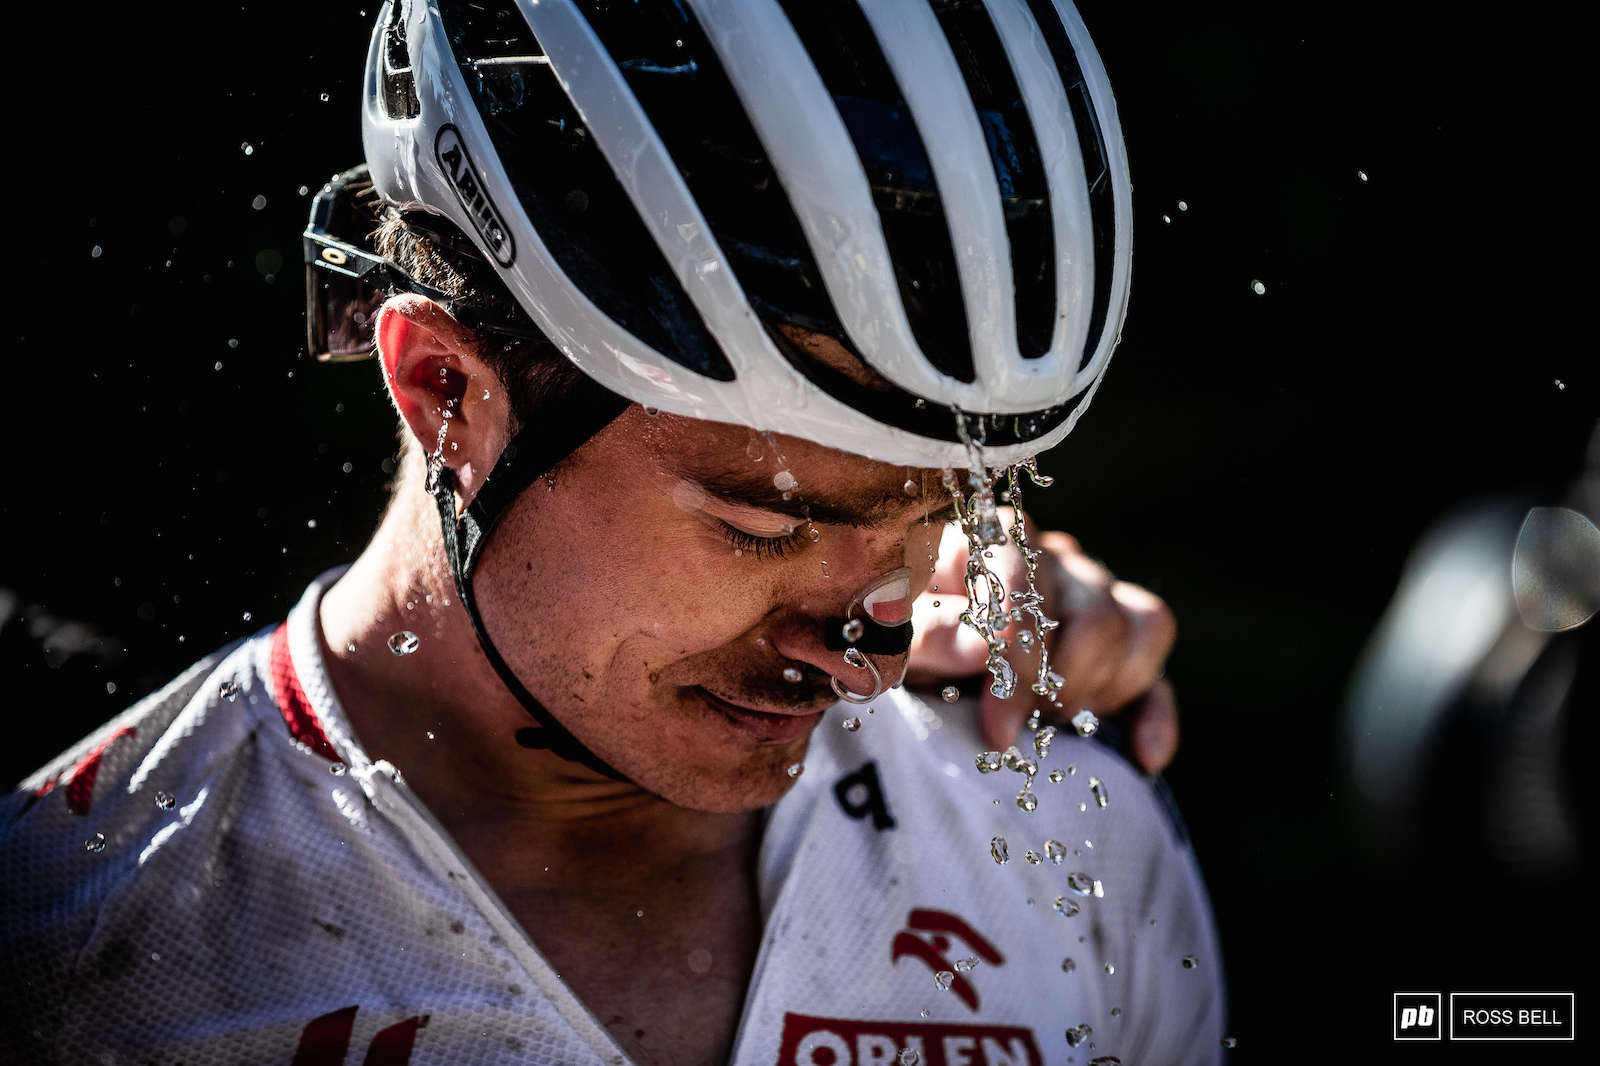 Bartlomiej Wawak cools down after his red hot ride into 7th place.